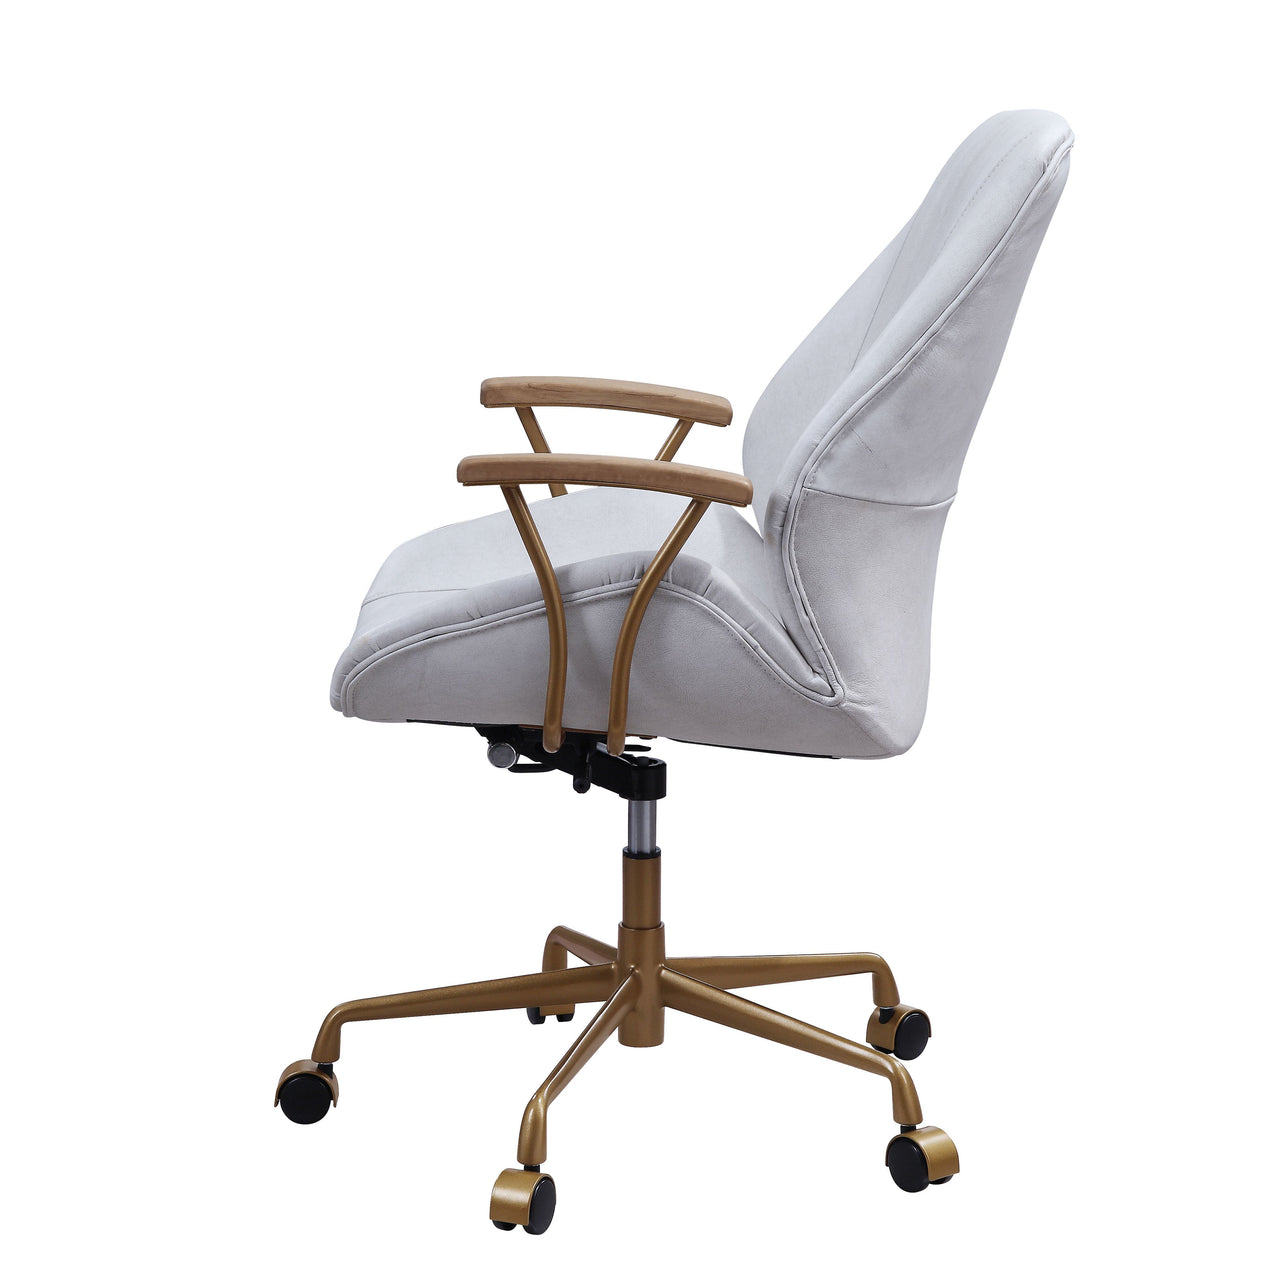 Argrio - Office Chair - Tony's Home Furnishings